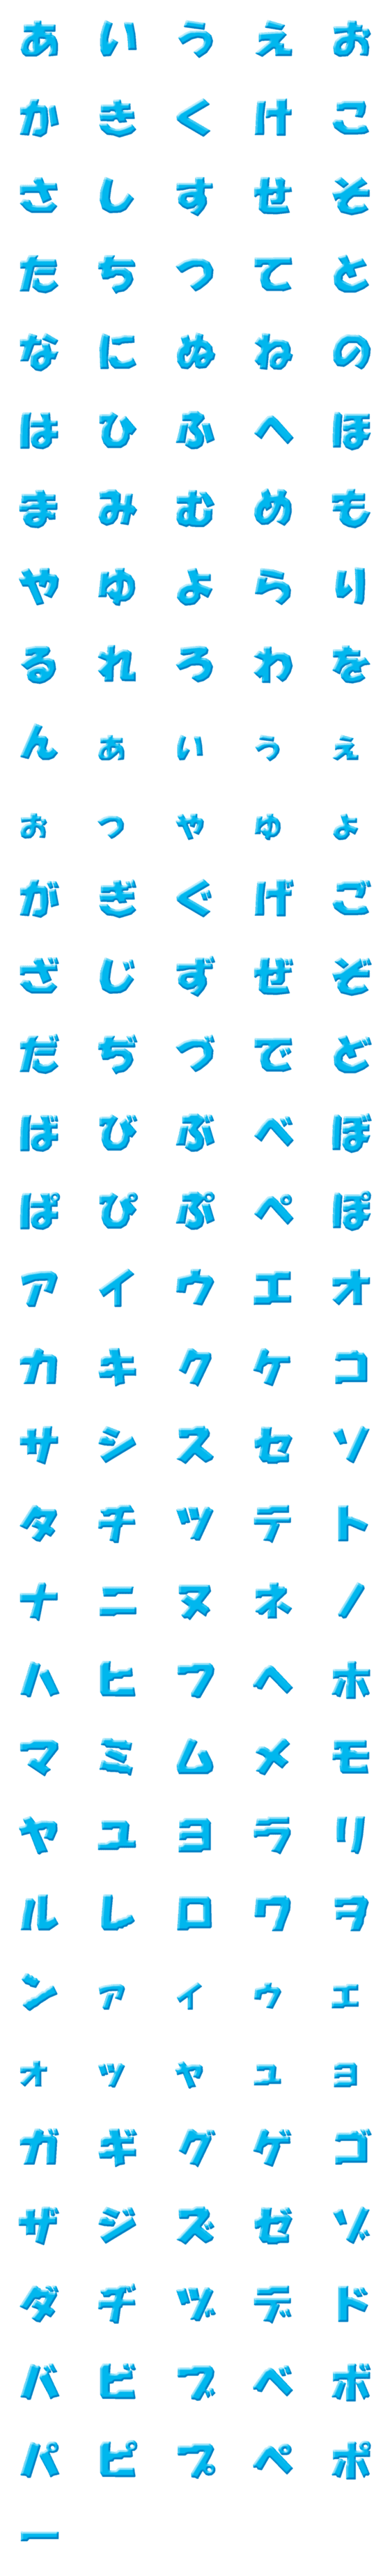 [LINE絵文字]青い文字の画像一覧